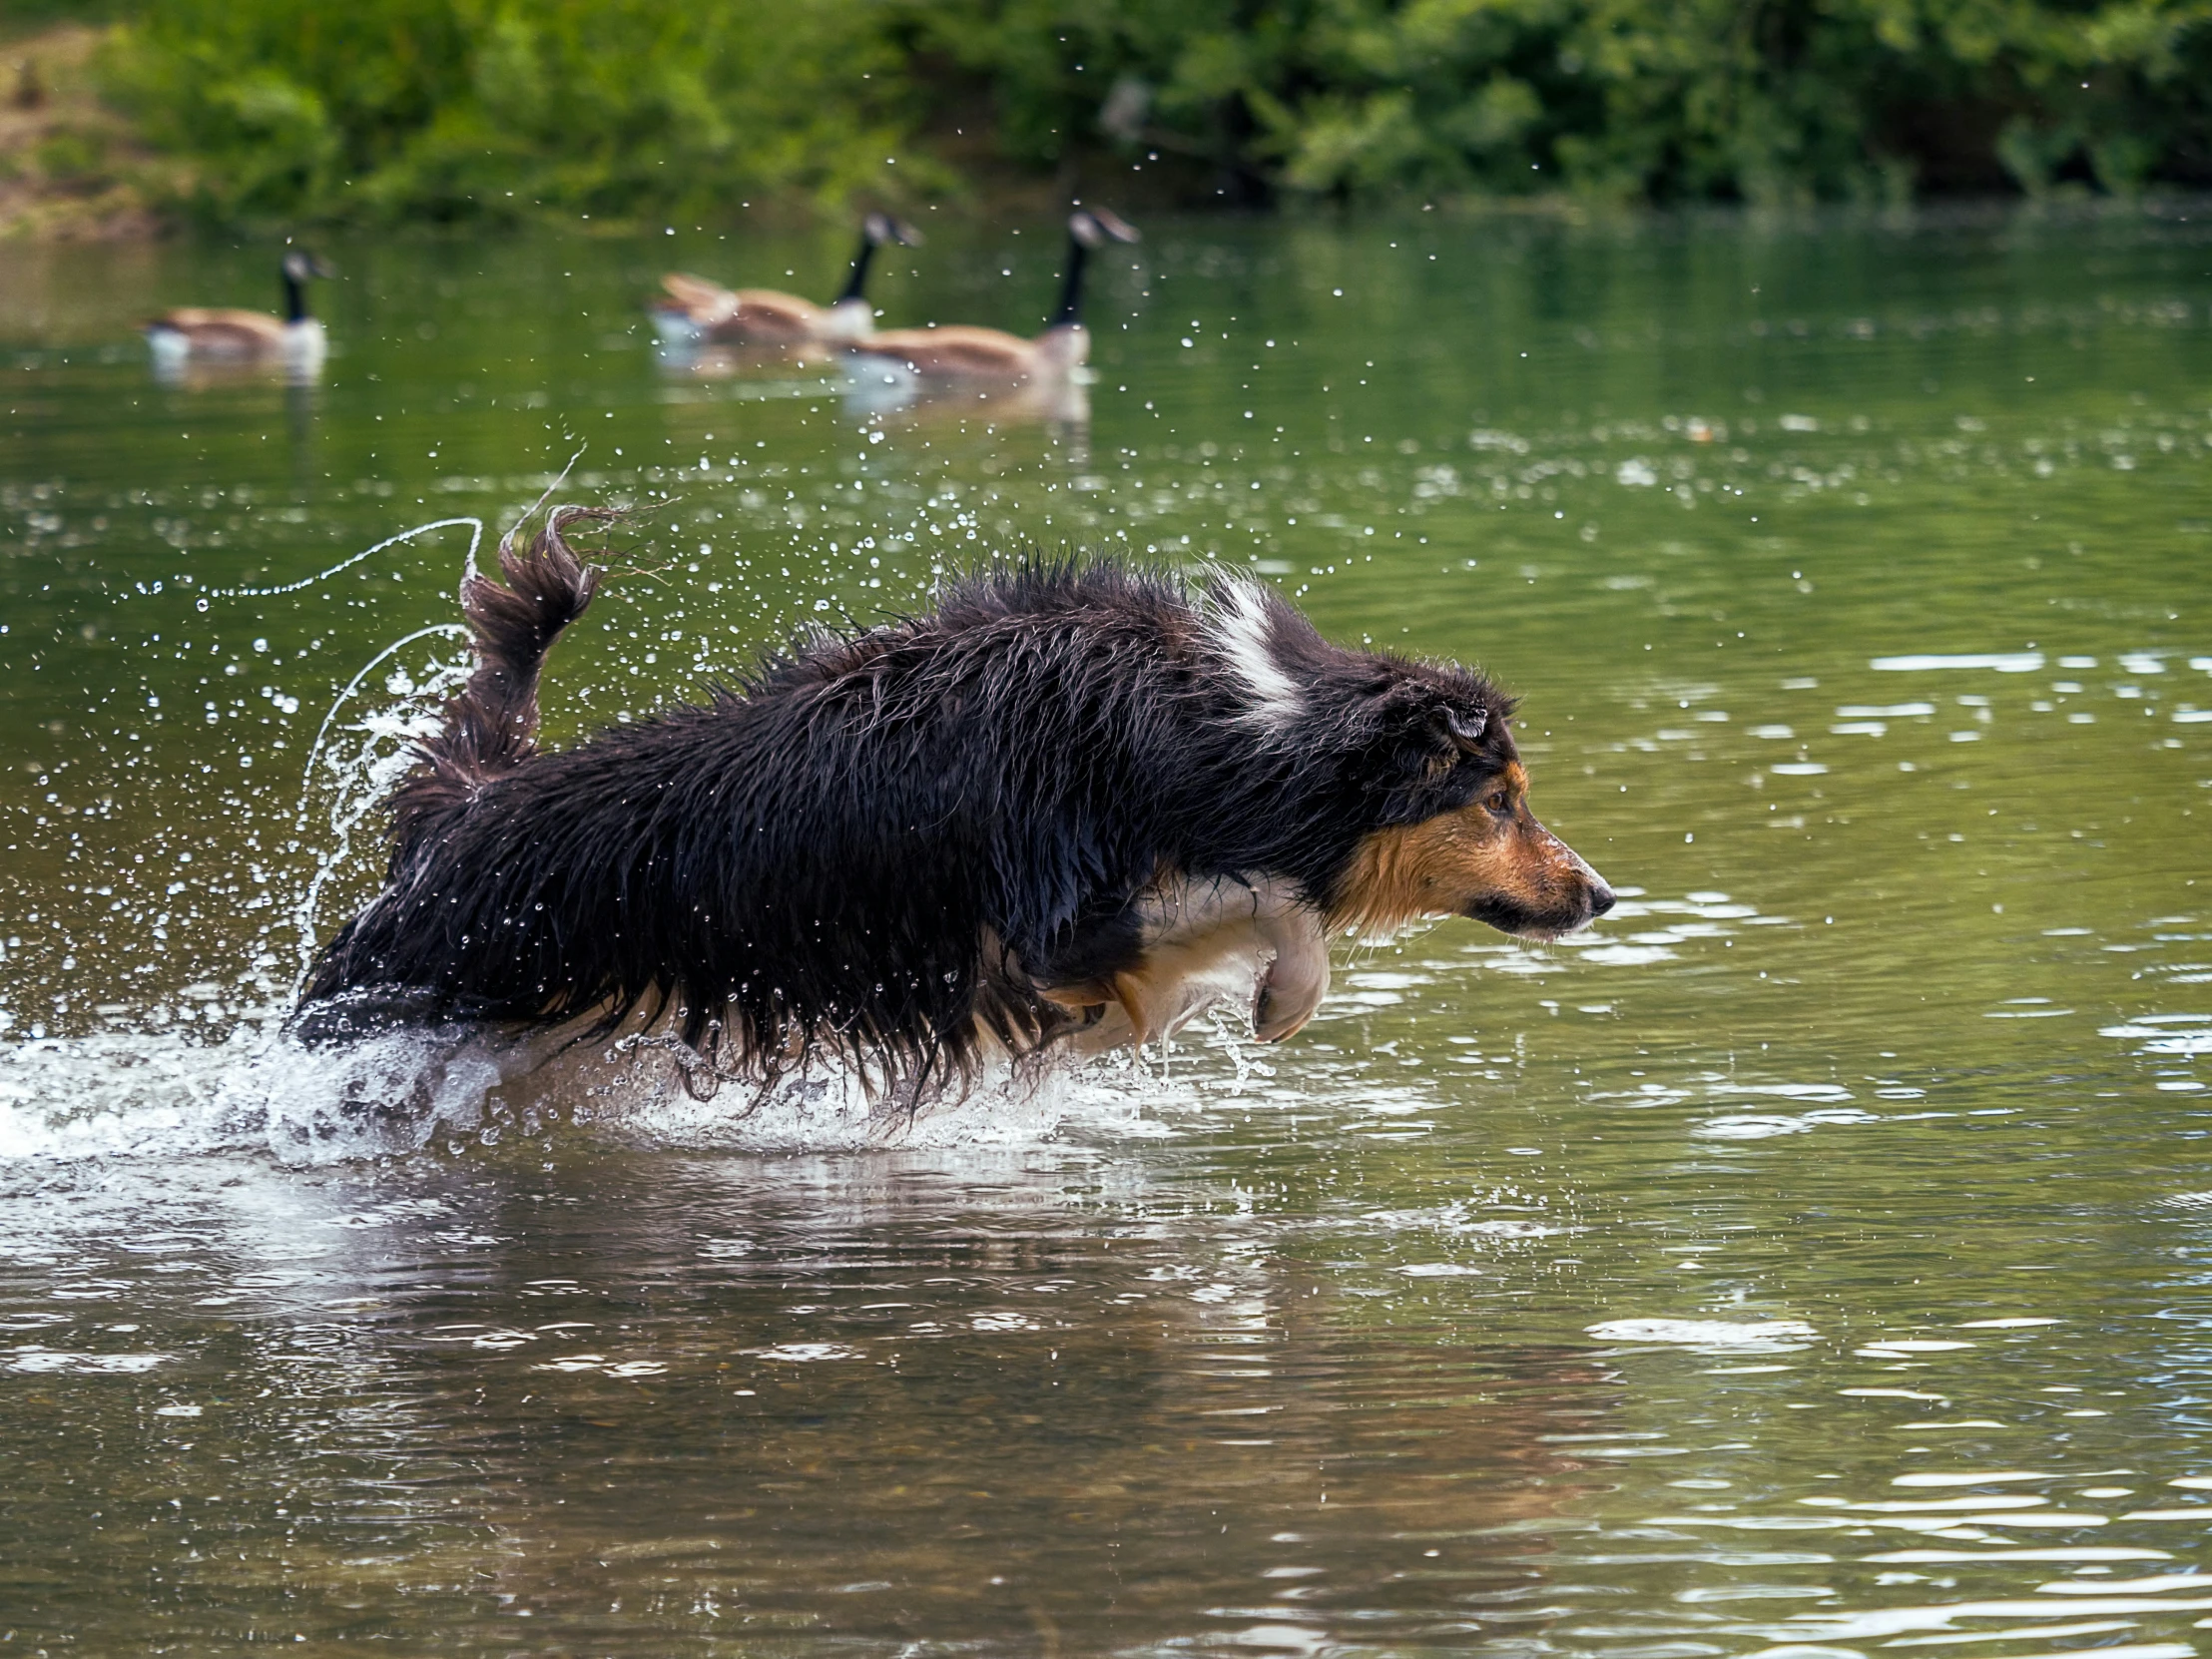 the dog is splashing water out his face into the lake